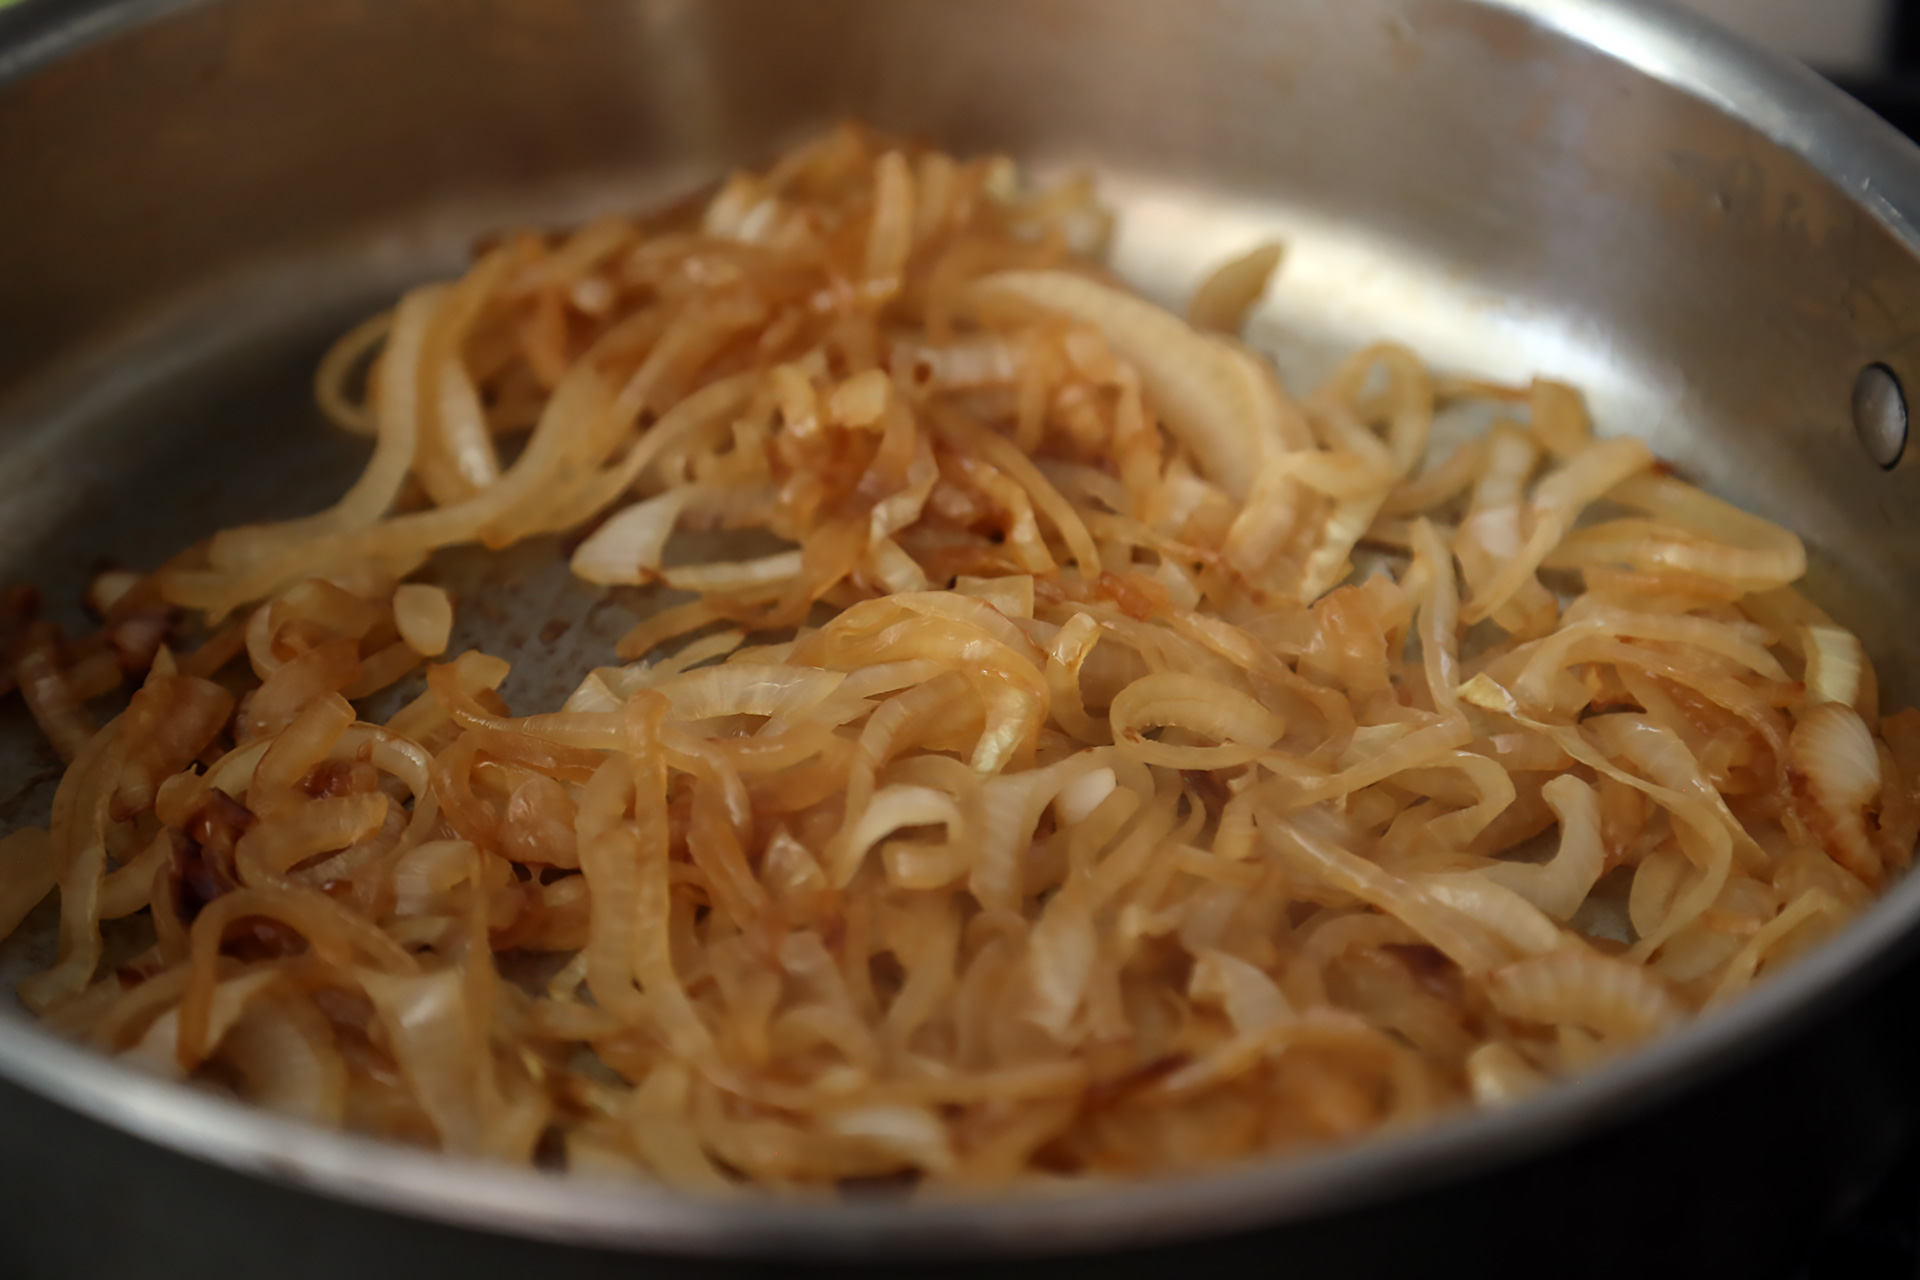 In a large saute pan over medium heat, warm the oil. Add the onions and a pinch of salt and cook, stirring, until they start to caramelize, about 15 minutes. Transfer to a bowl.